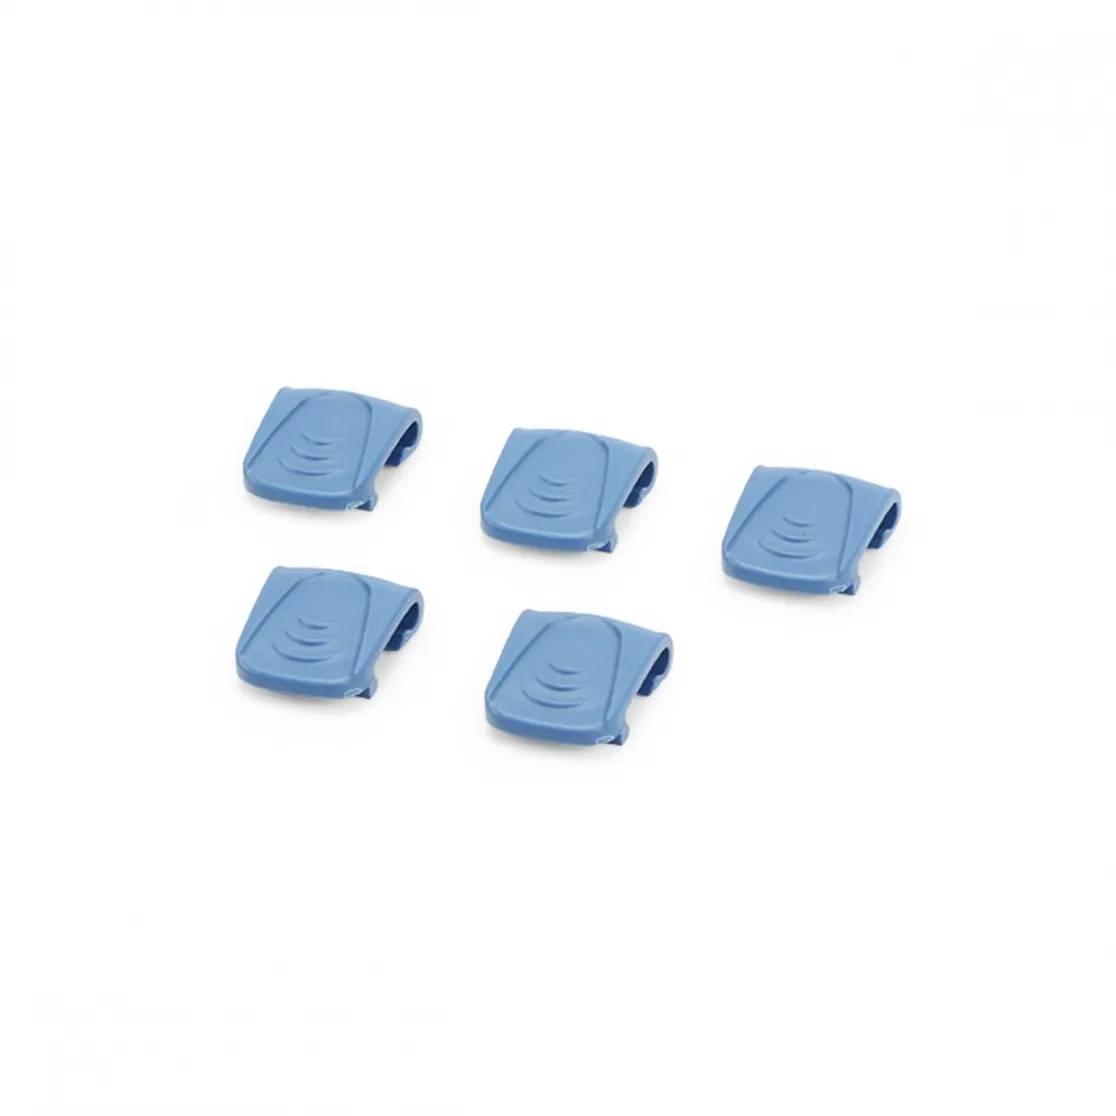 Pump Cage Clips | Replacement AquaForce Cage Clip Kit